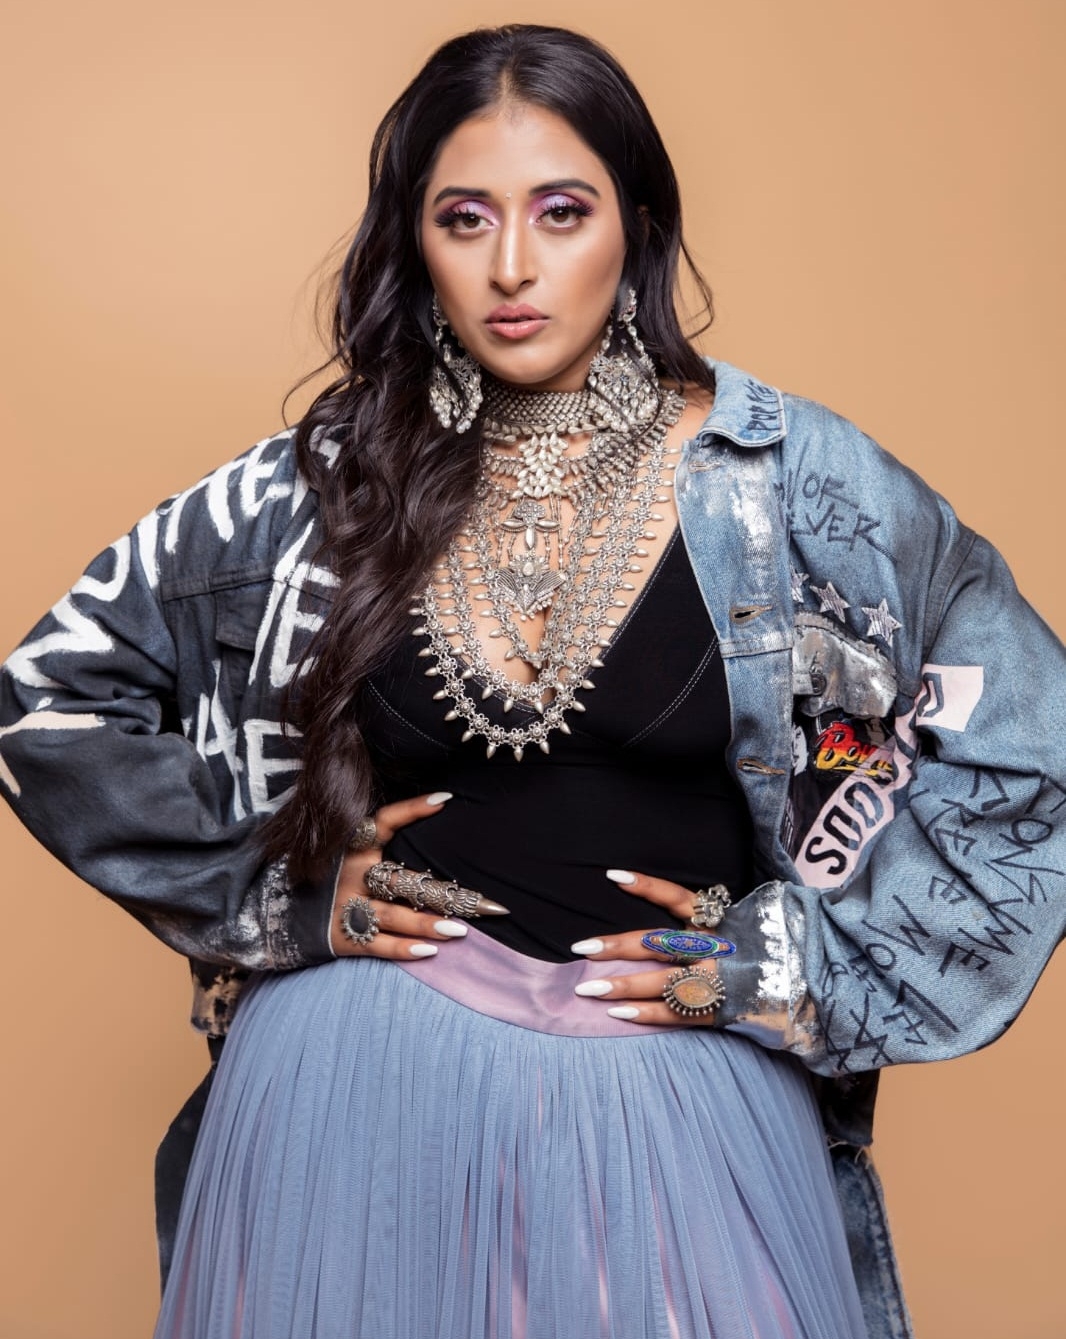  Raja Kumari Is 'thrilled' For Her Cannes Debut: 'my Music Has Inspired Audience'-TeluguStop.com